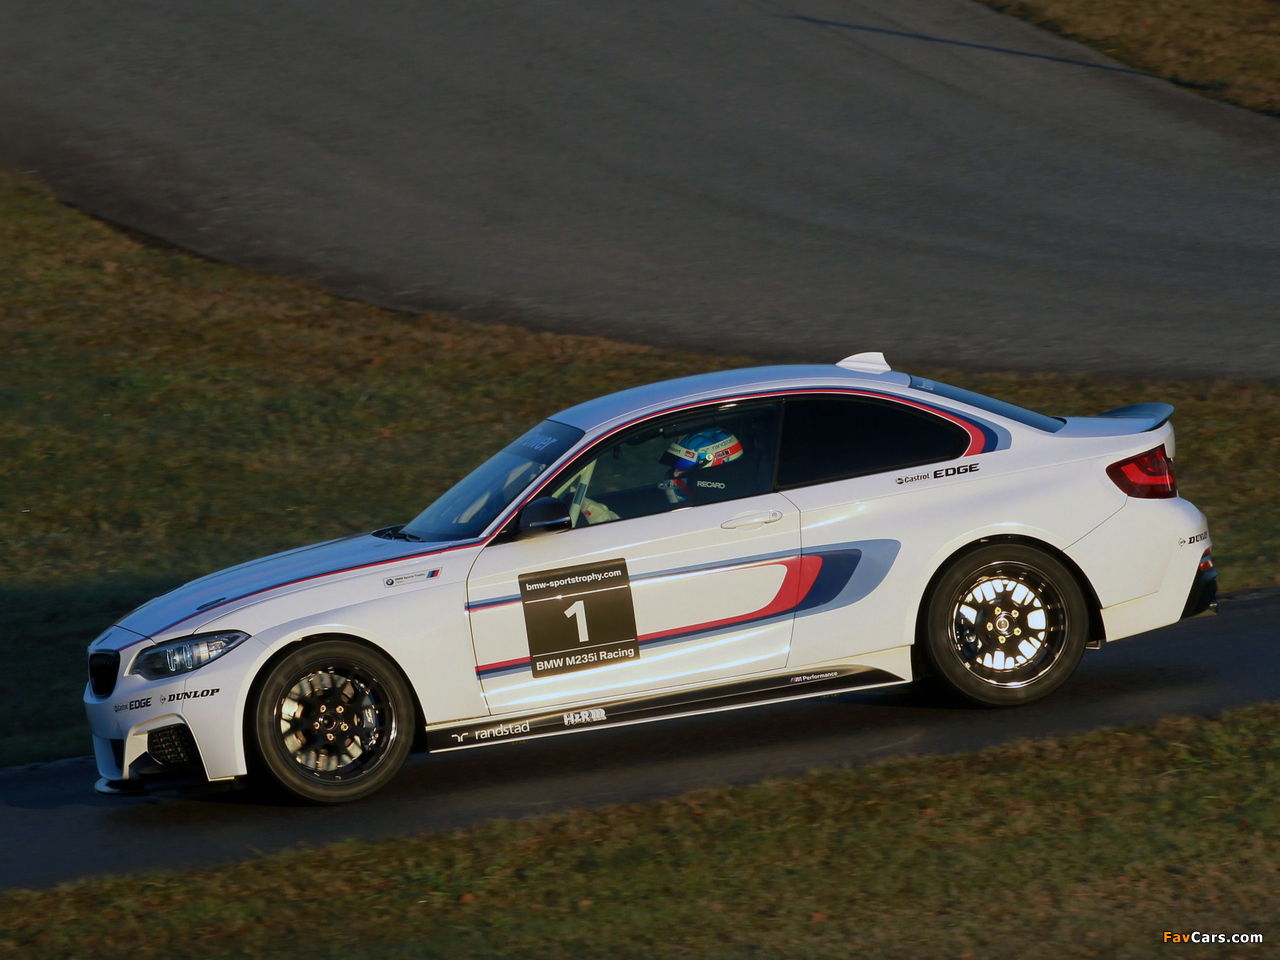 Pictures of BMW M235i Racing (F22) 2014 (1280 x 960)